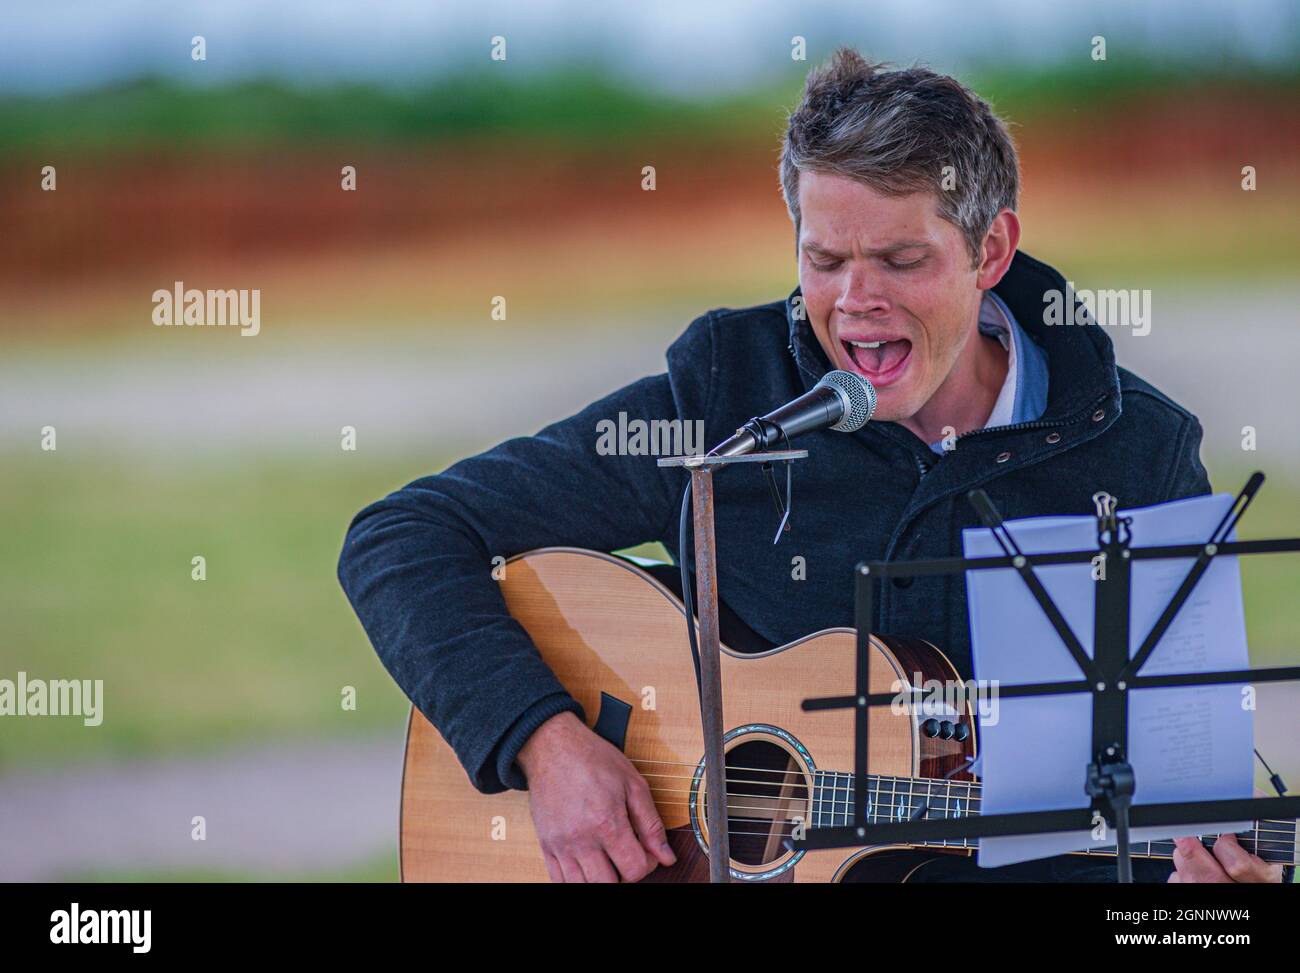 A guitarist and folk singer performing at an outdoor event Stock Photo